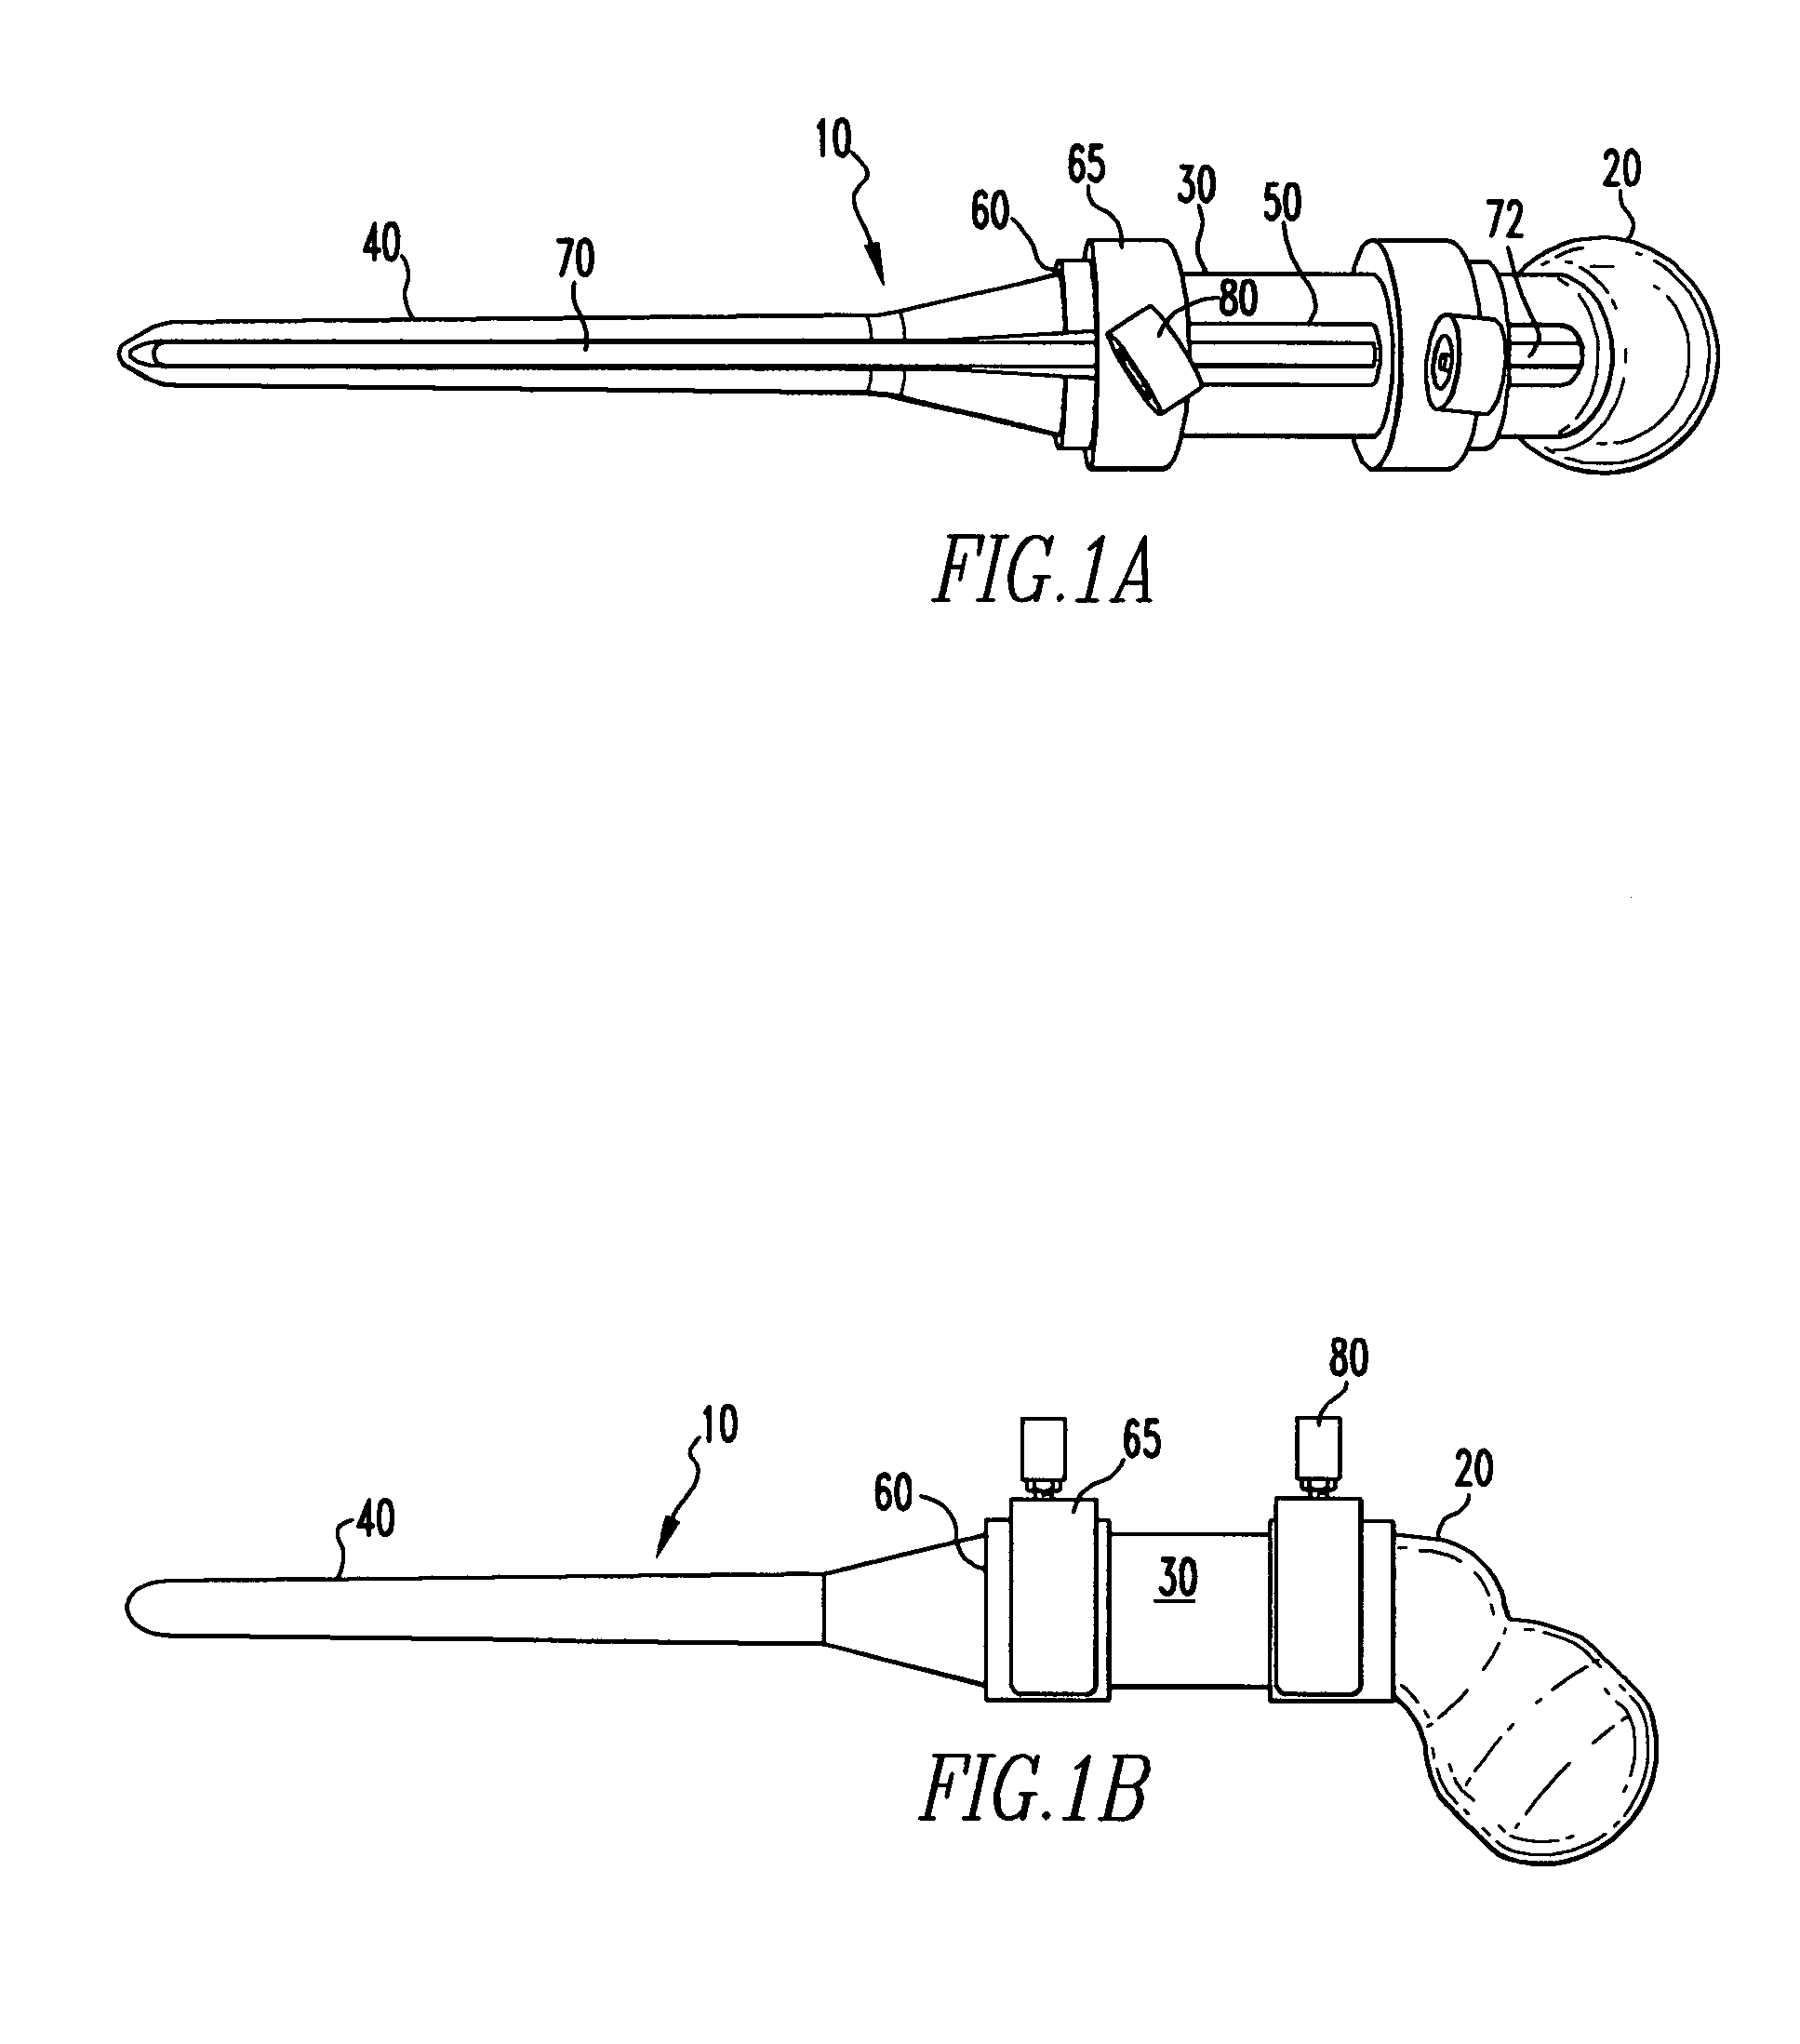 Method of forming a temporary implant and mold assembly for same